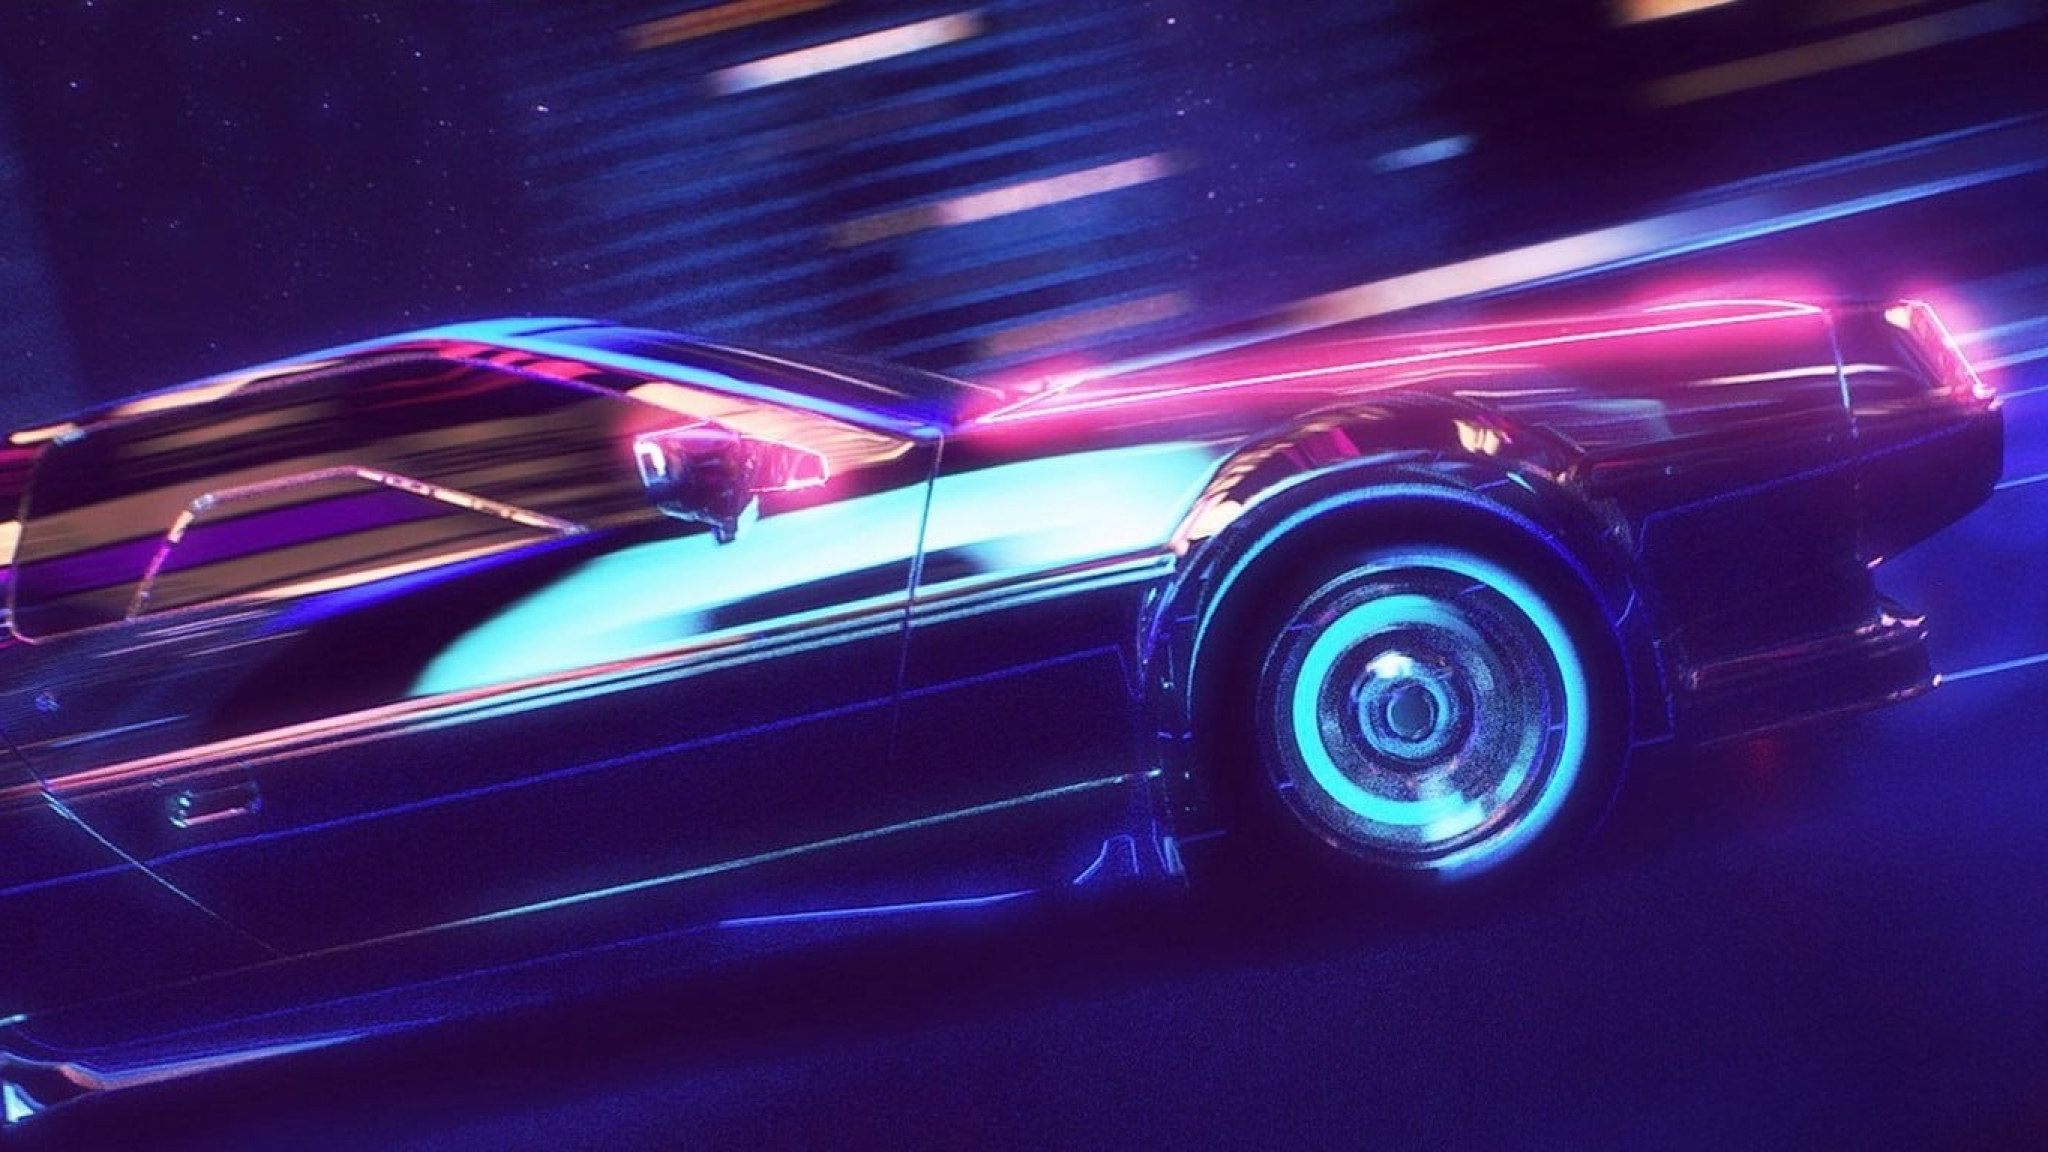 Neon Wallpaper • Black car, pink and blue car timelapse photography, New Retro Wave wallpaper • Wallpaper For You The Best Wallpaper For Desktop & Mobile